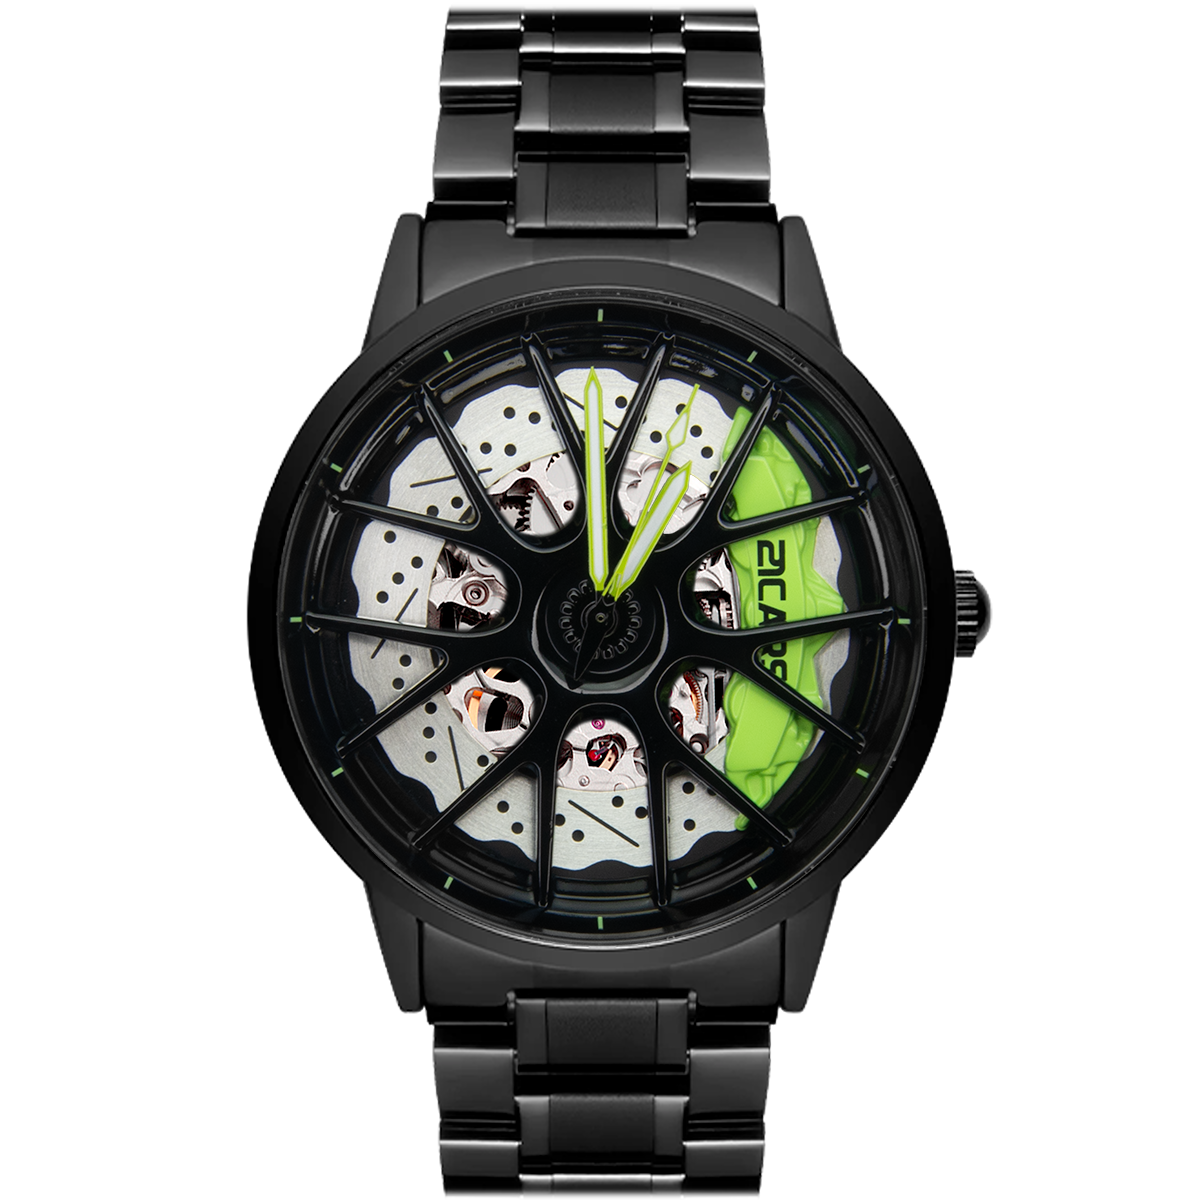 Trackmaster GT3 - Green/Black | Automatic